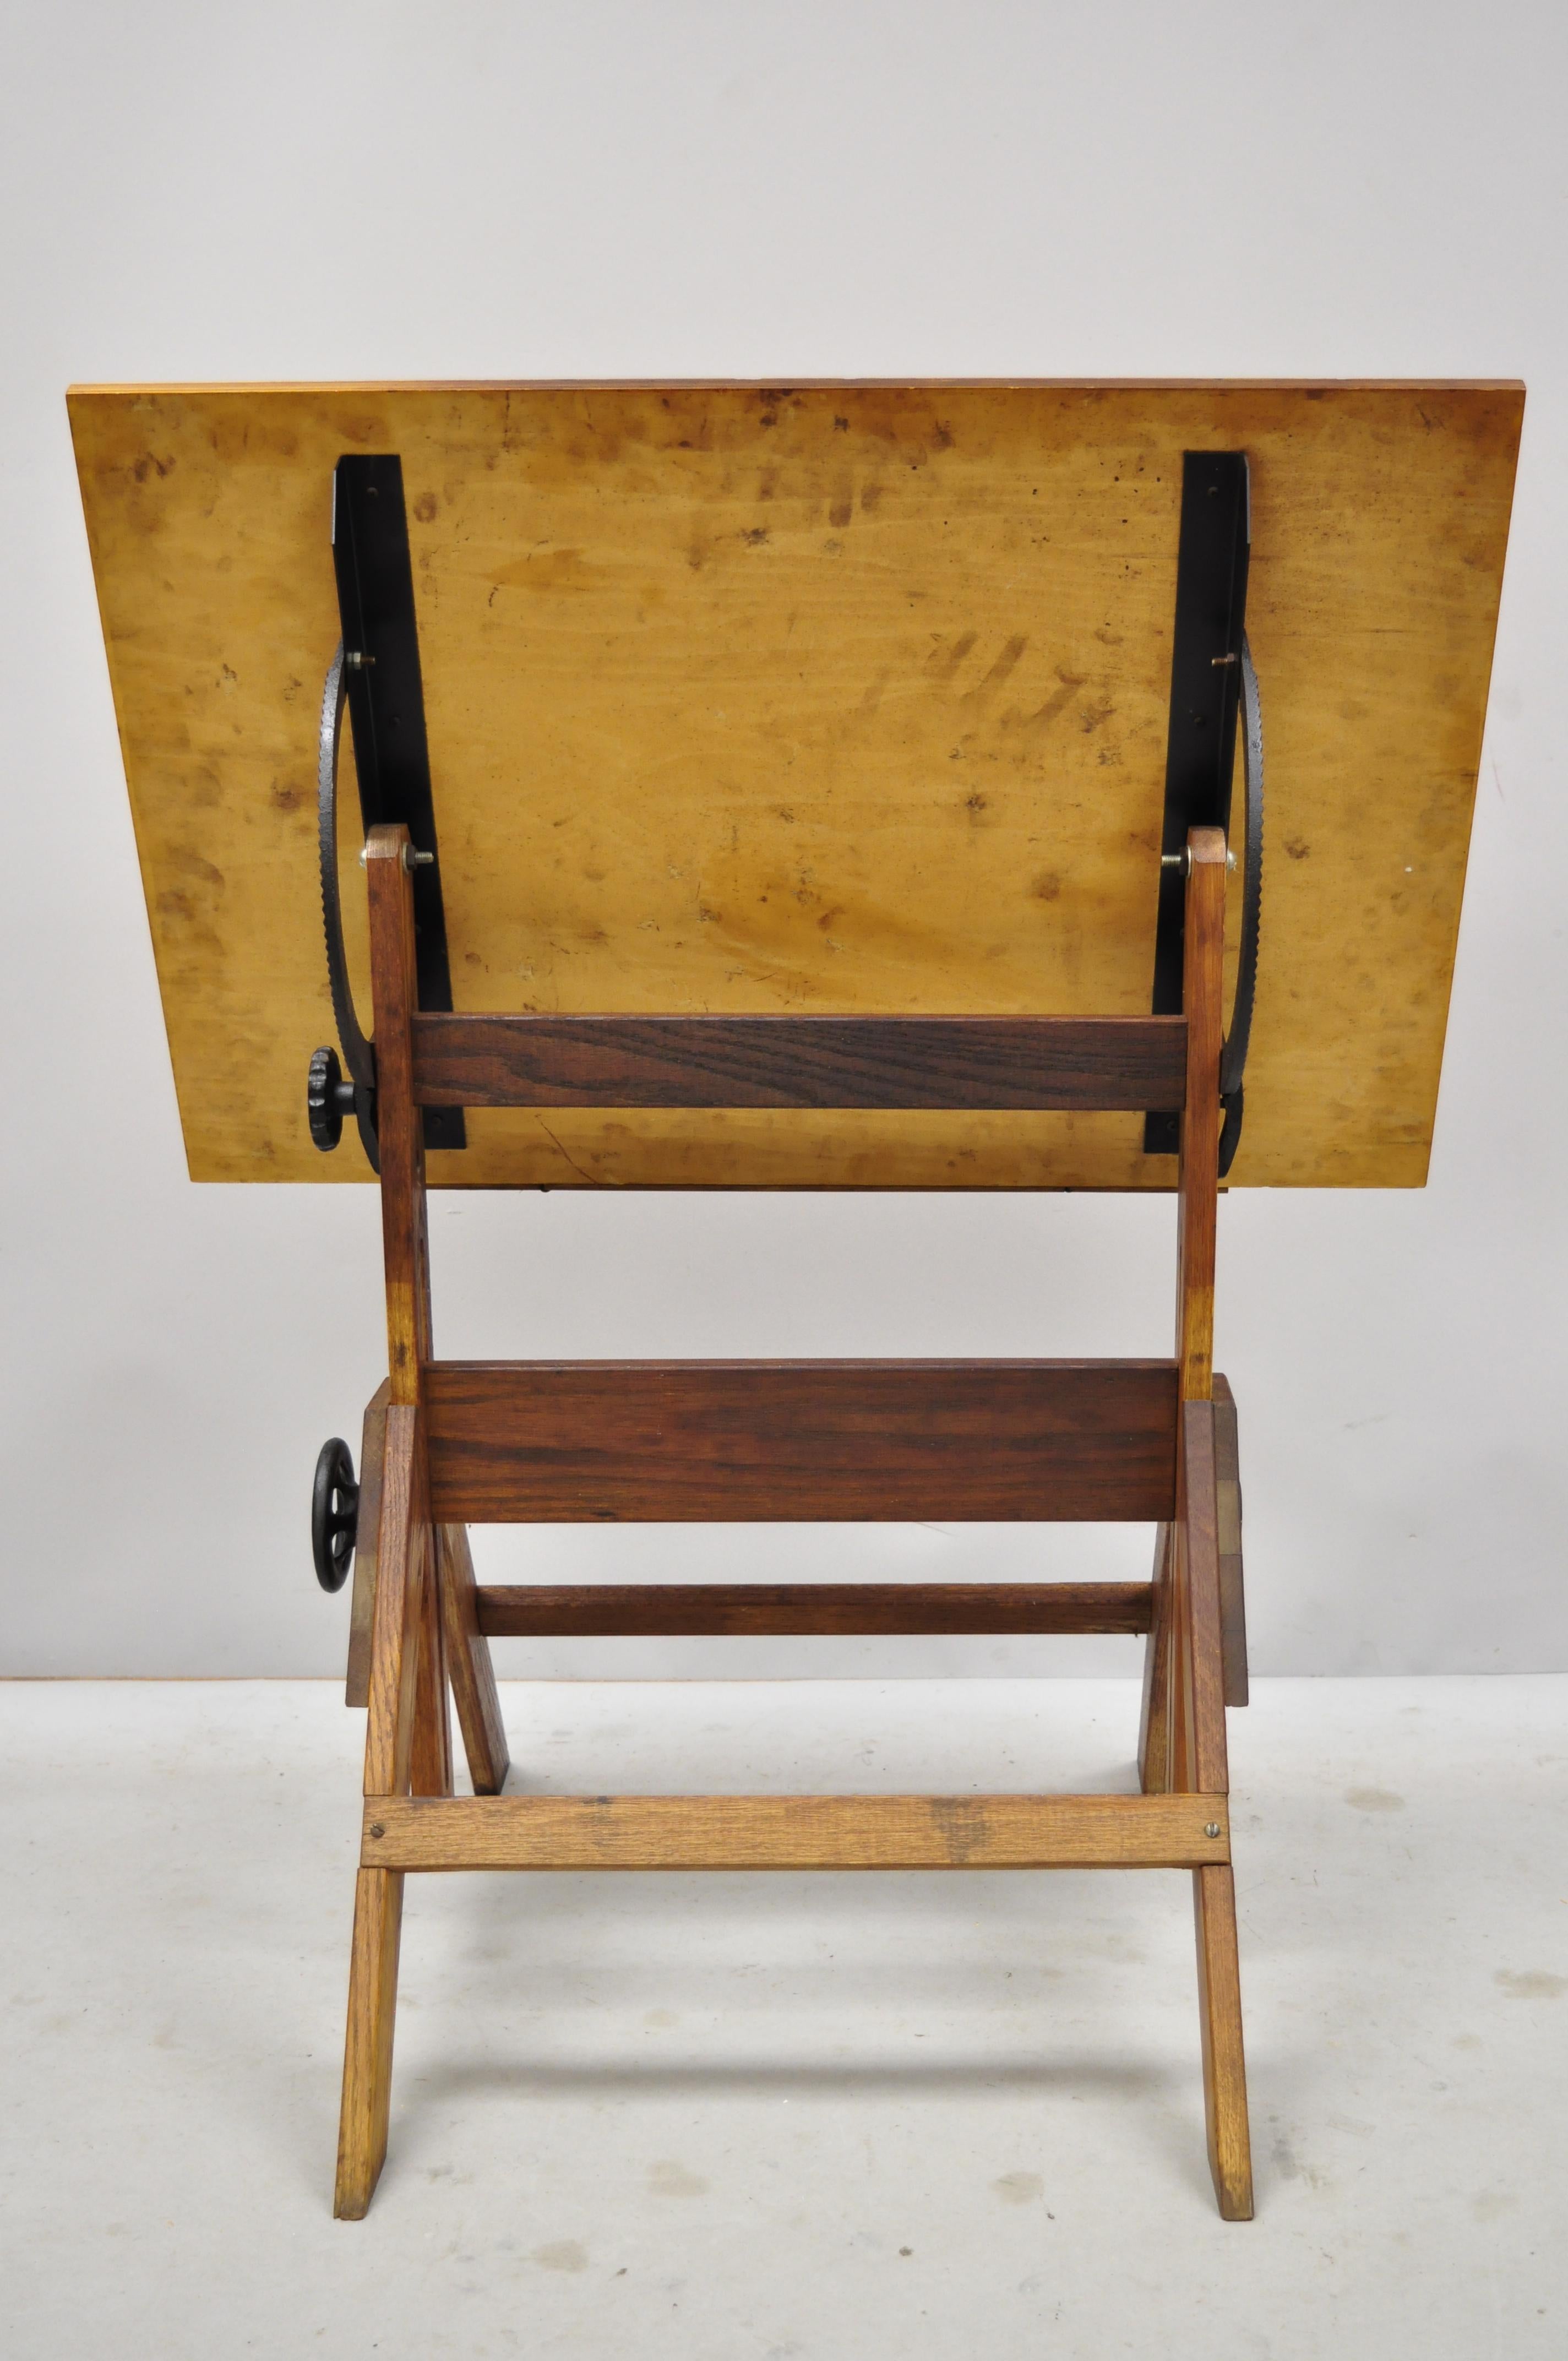 North American Oakwood and Cast Iron Adjustable Small Drafting Table Attributed to Hamilton